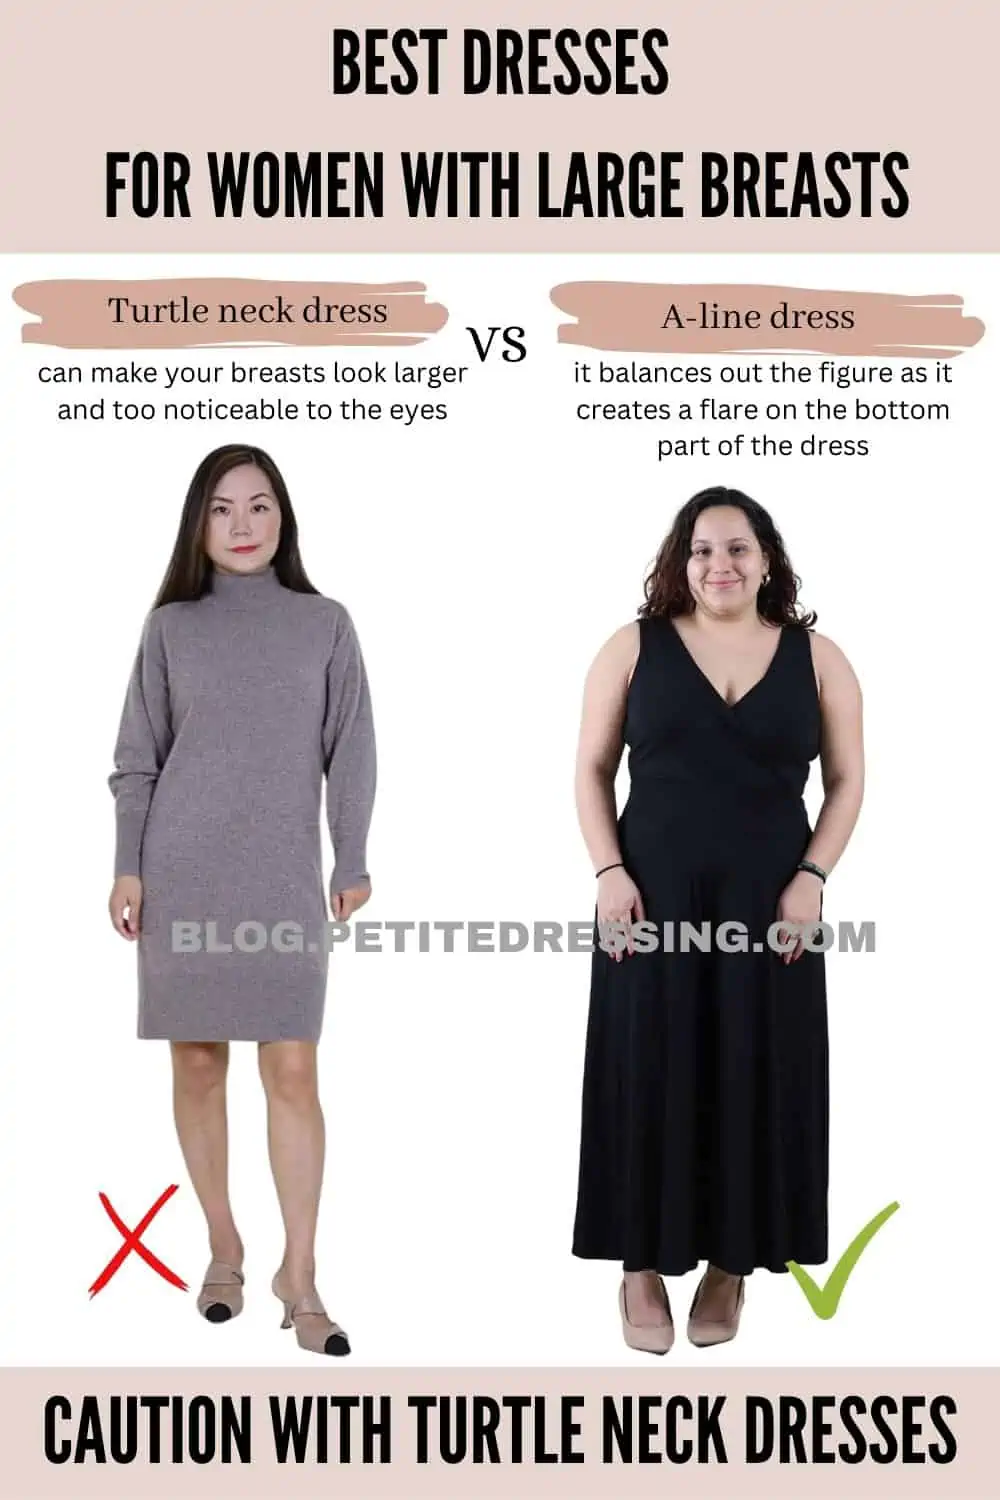 The Complete Dress Guide for Women with Large Breasts - Petite Dressing